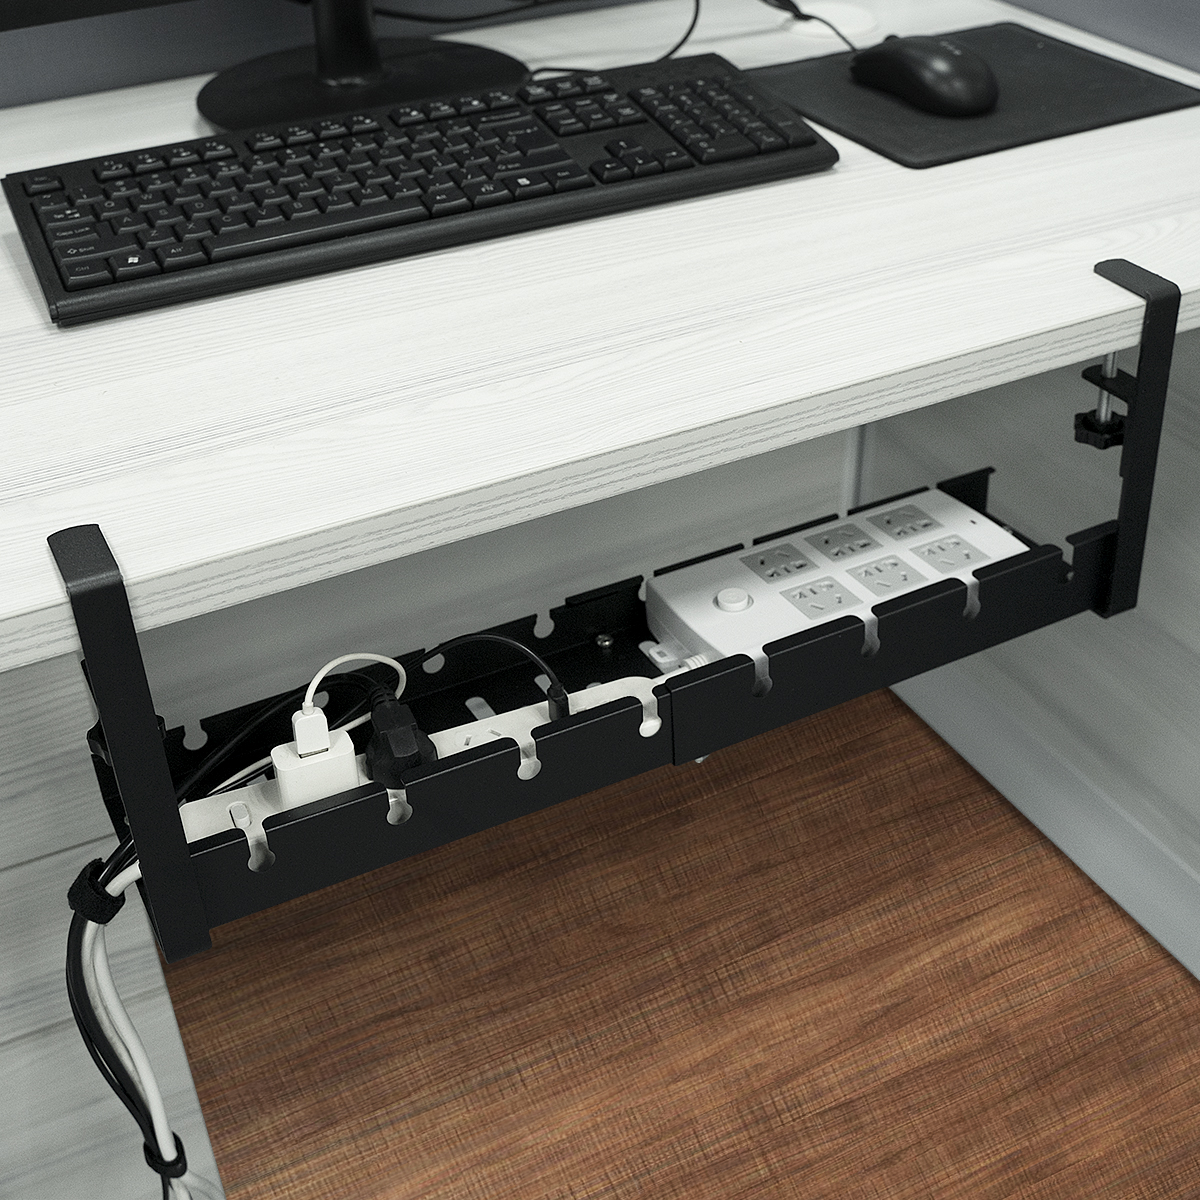 Cable Management Under Desk Cord Basket Tray Cable Organize Storage Black/White